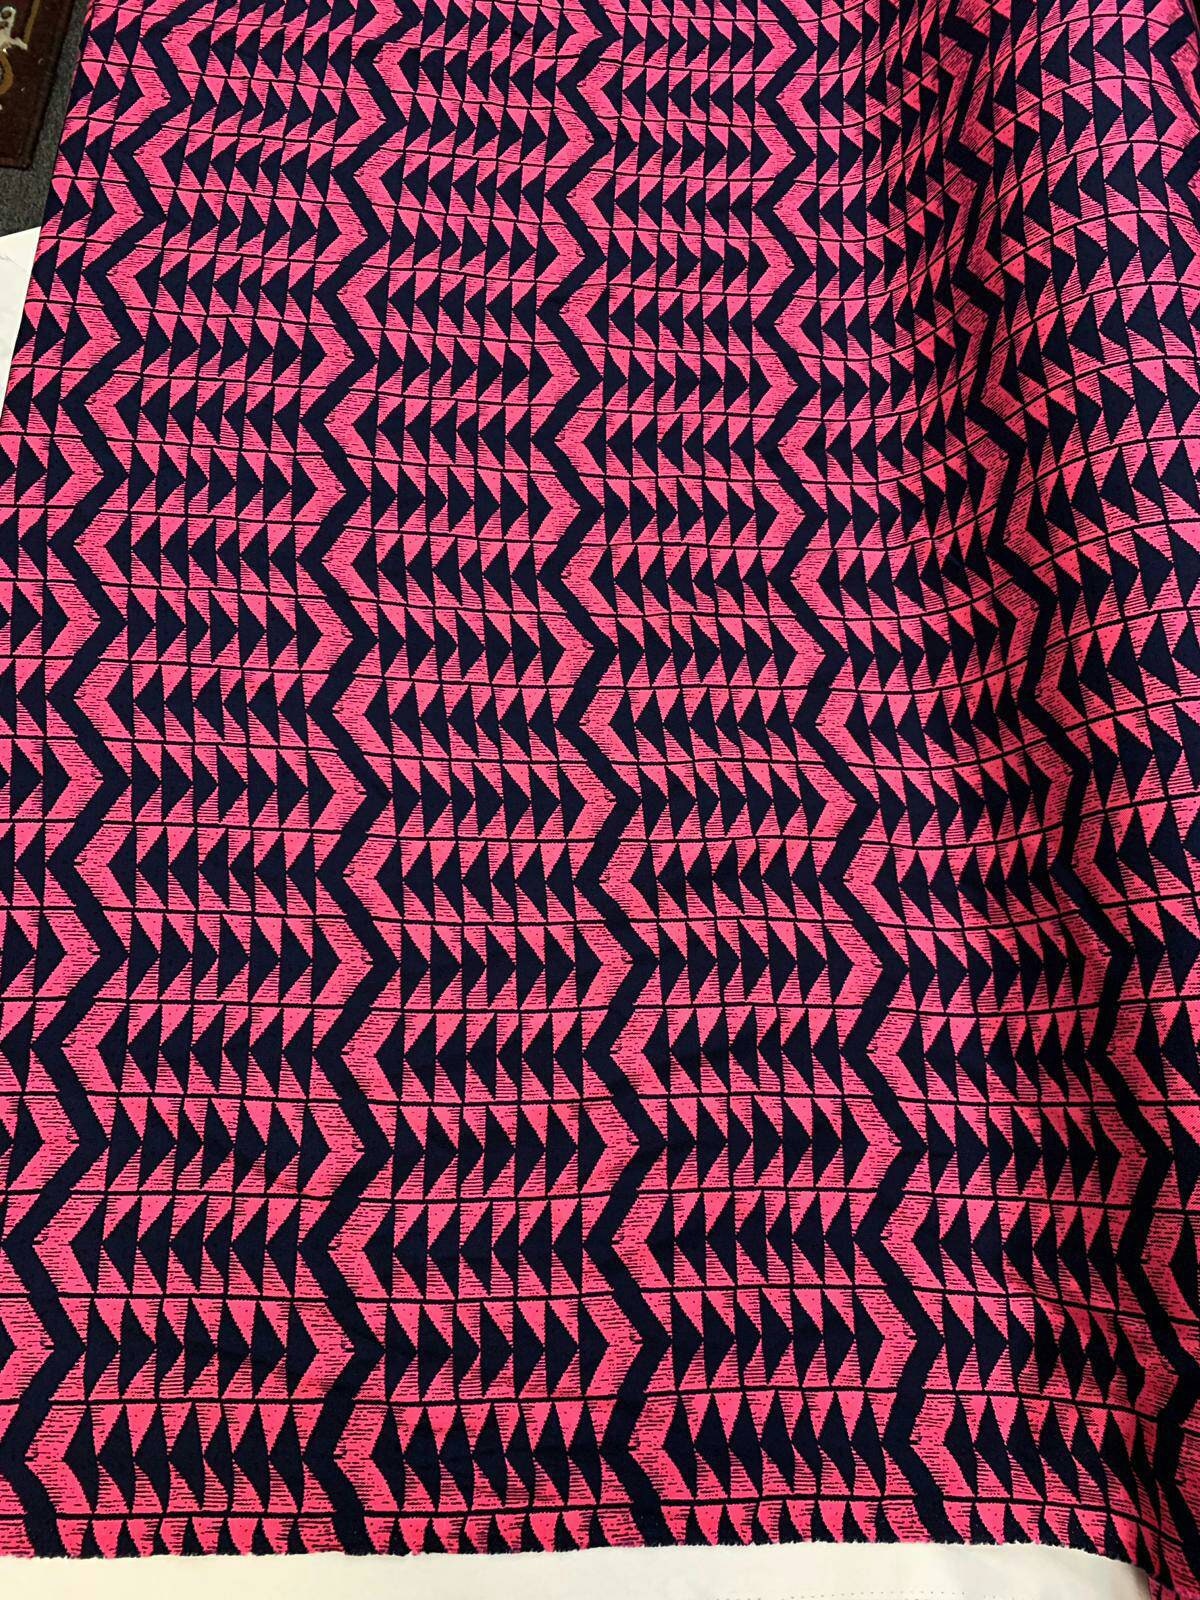 Rayon challis very soft geometric pinks and blues  Fabric by the yard 58 inches wide flowy organic kids dress draping clothing decoration